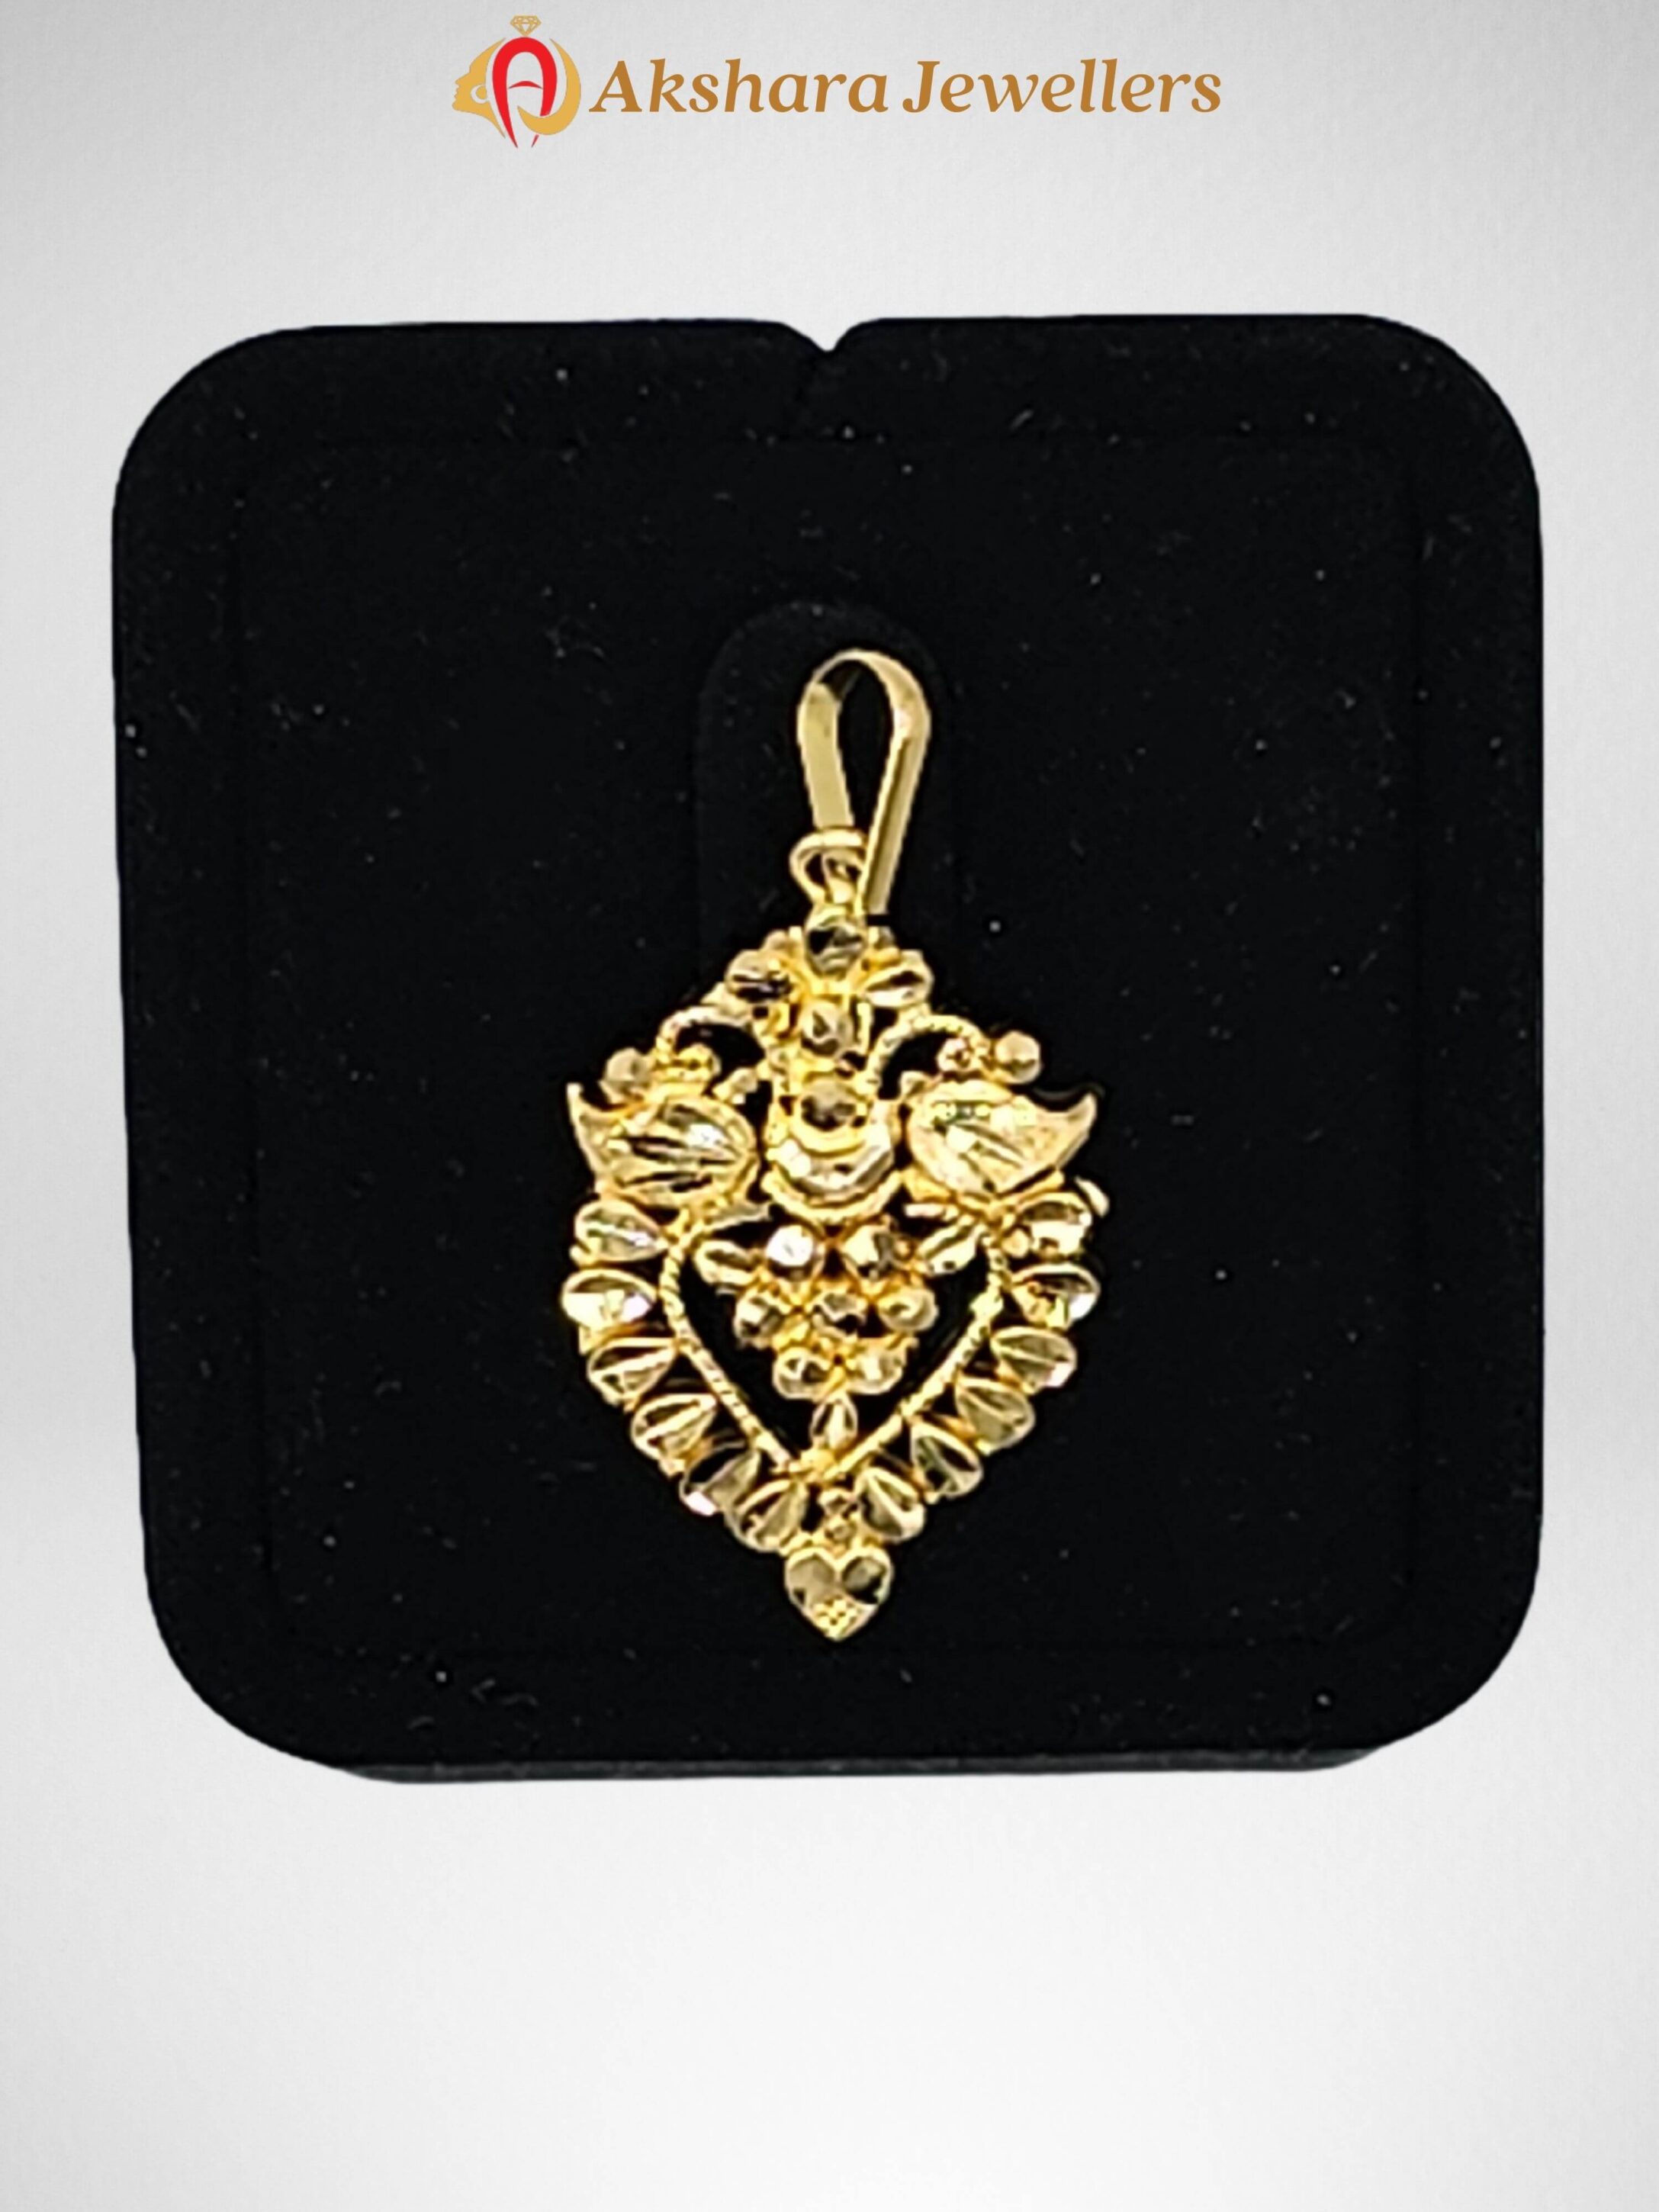 Pendant Collections, Gold Pendant Collections, Akshara Jewellers Pendant Collections, Akshara Jewellers, Sydney Akshara Jewellers